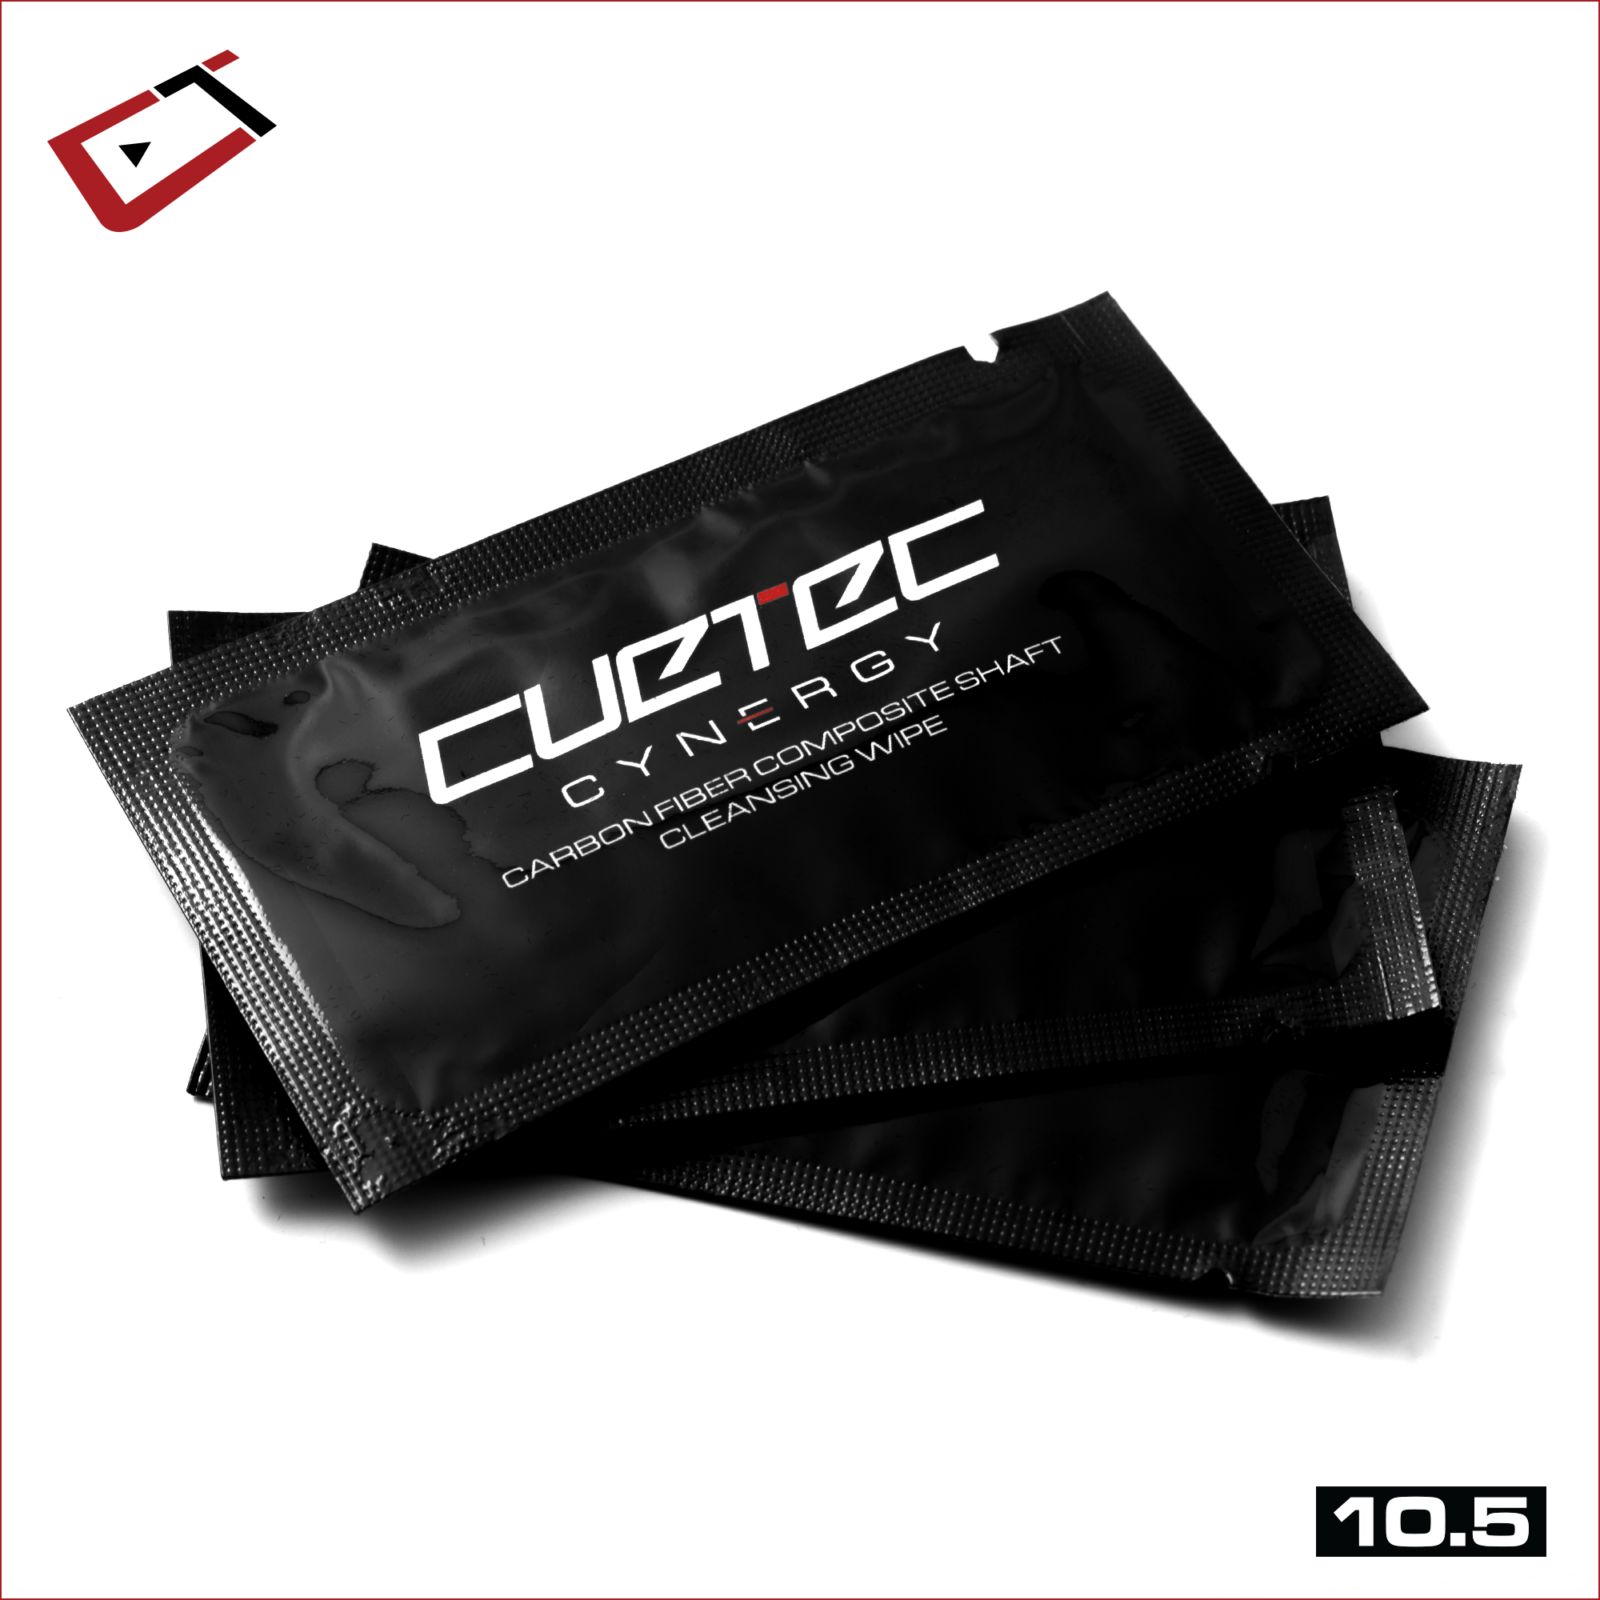 Cuetec Cynergy Shaft 10.5mm Mezz United 95-033T Wipes